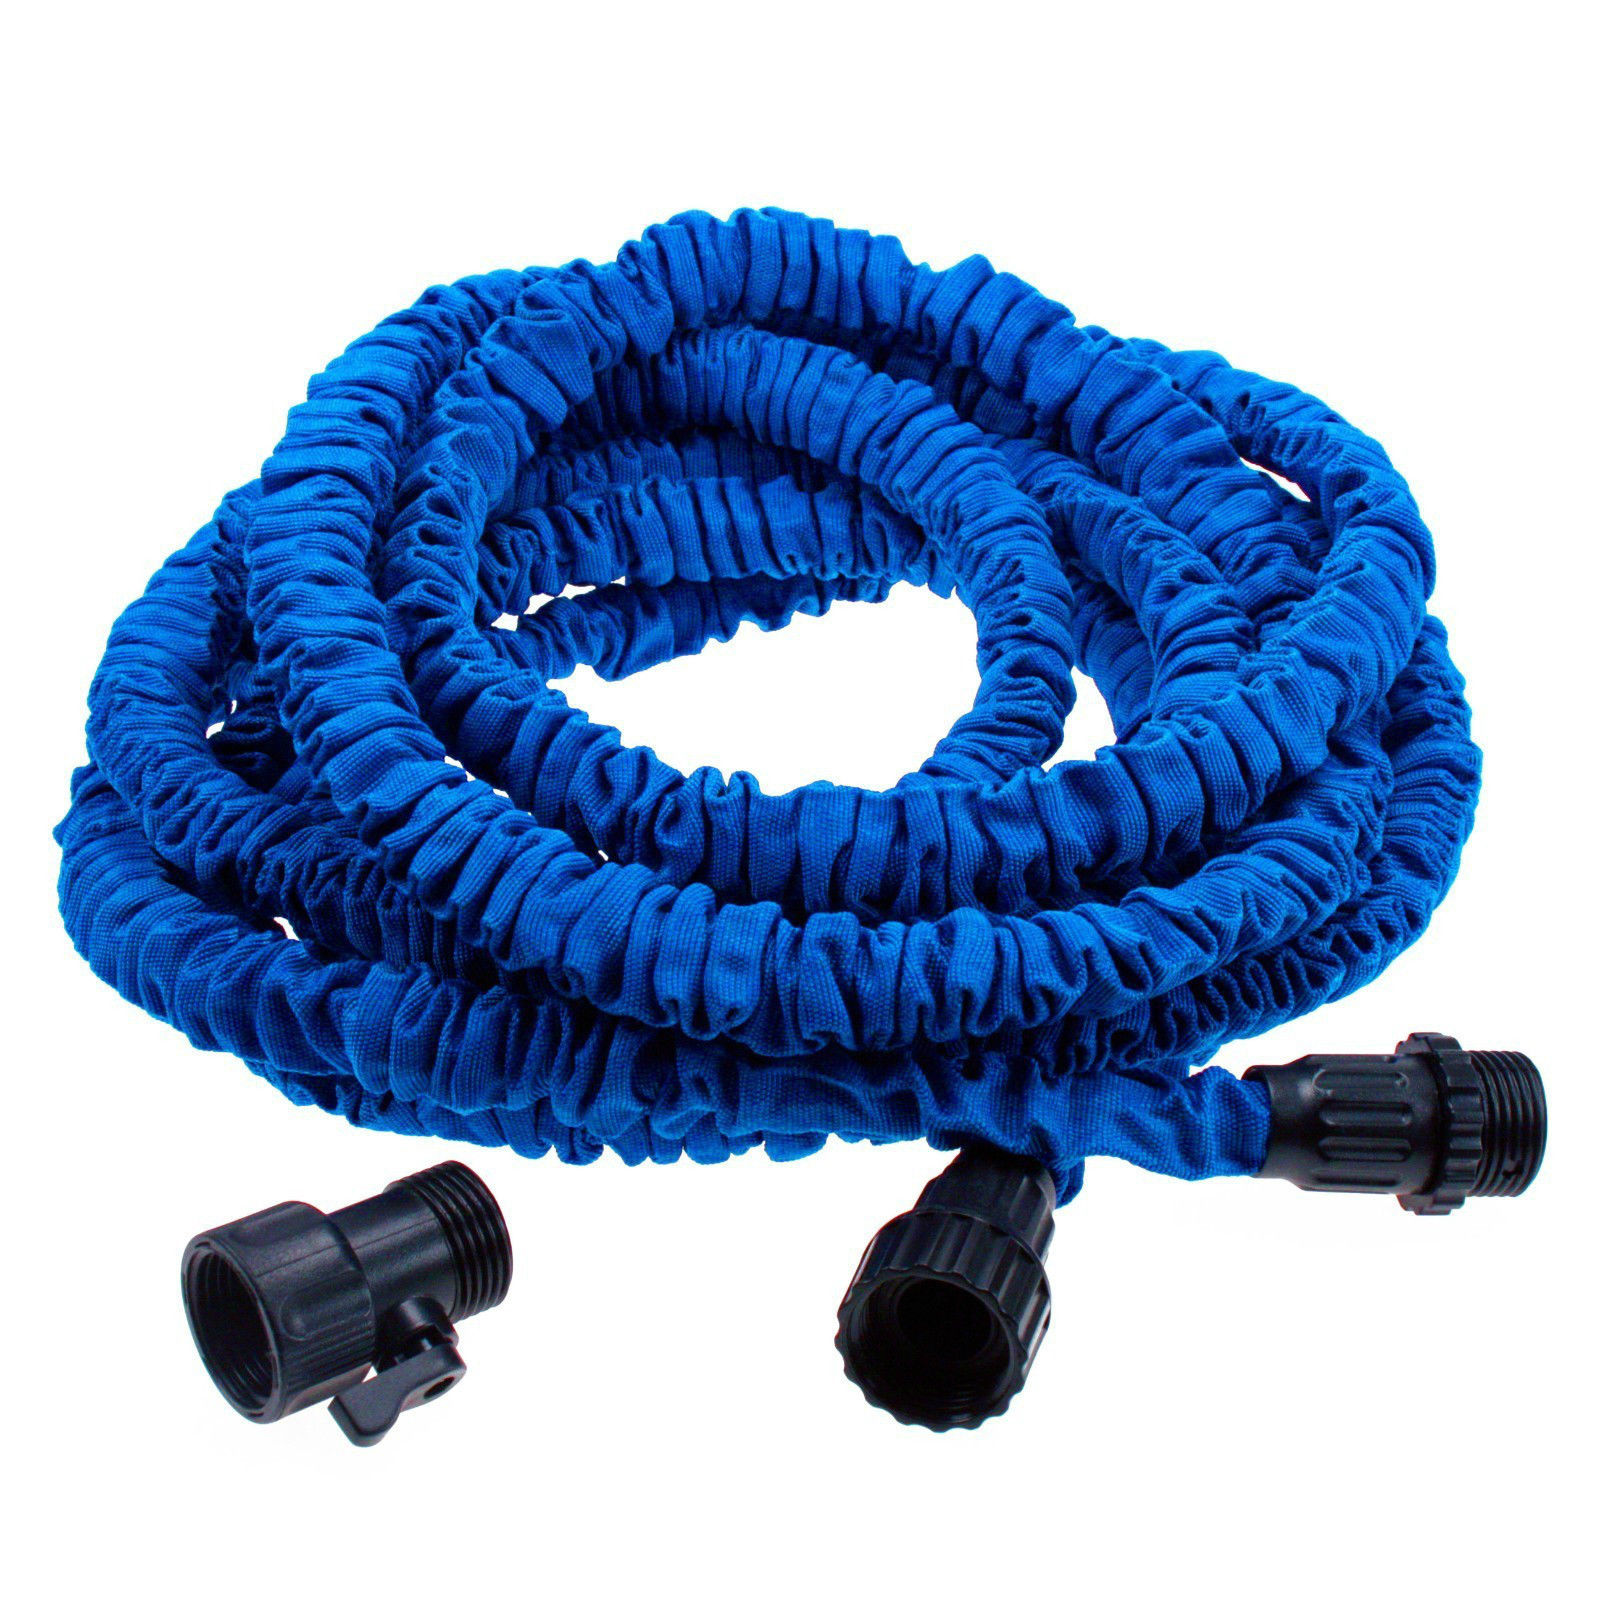 50ft Garden Water Hose Pocket Style As Seen On Tv Expandable Hose